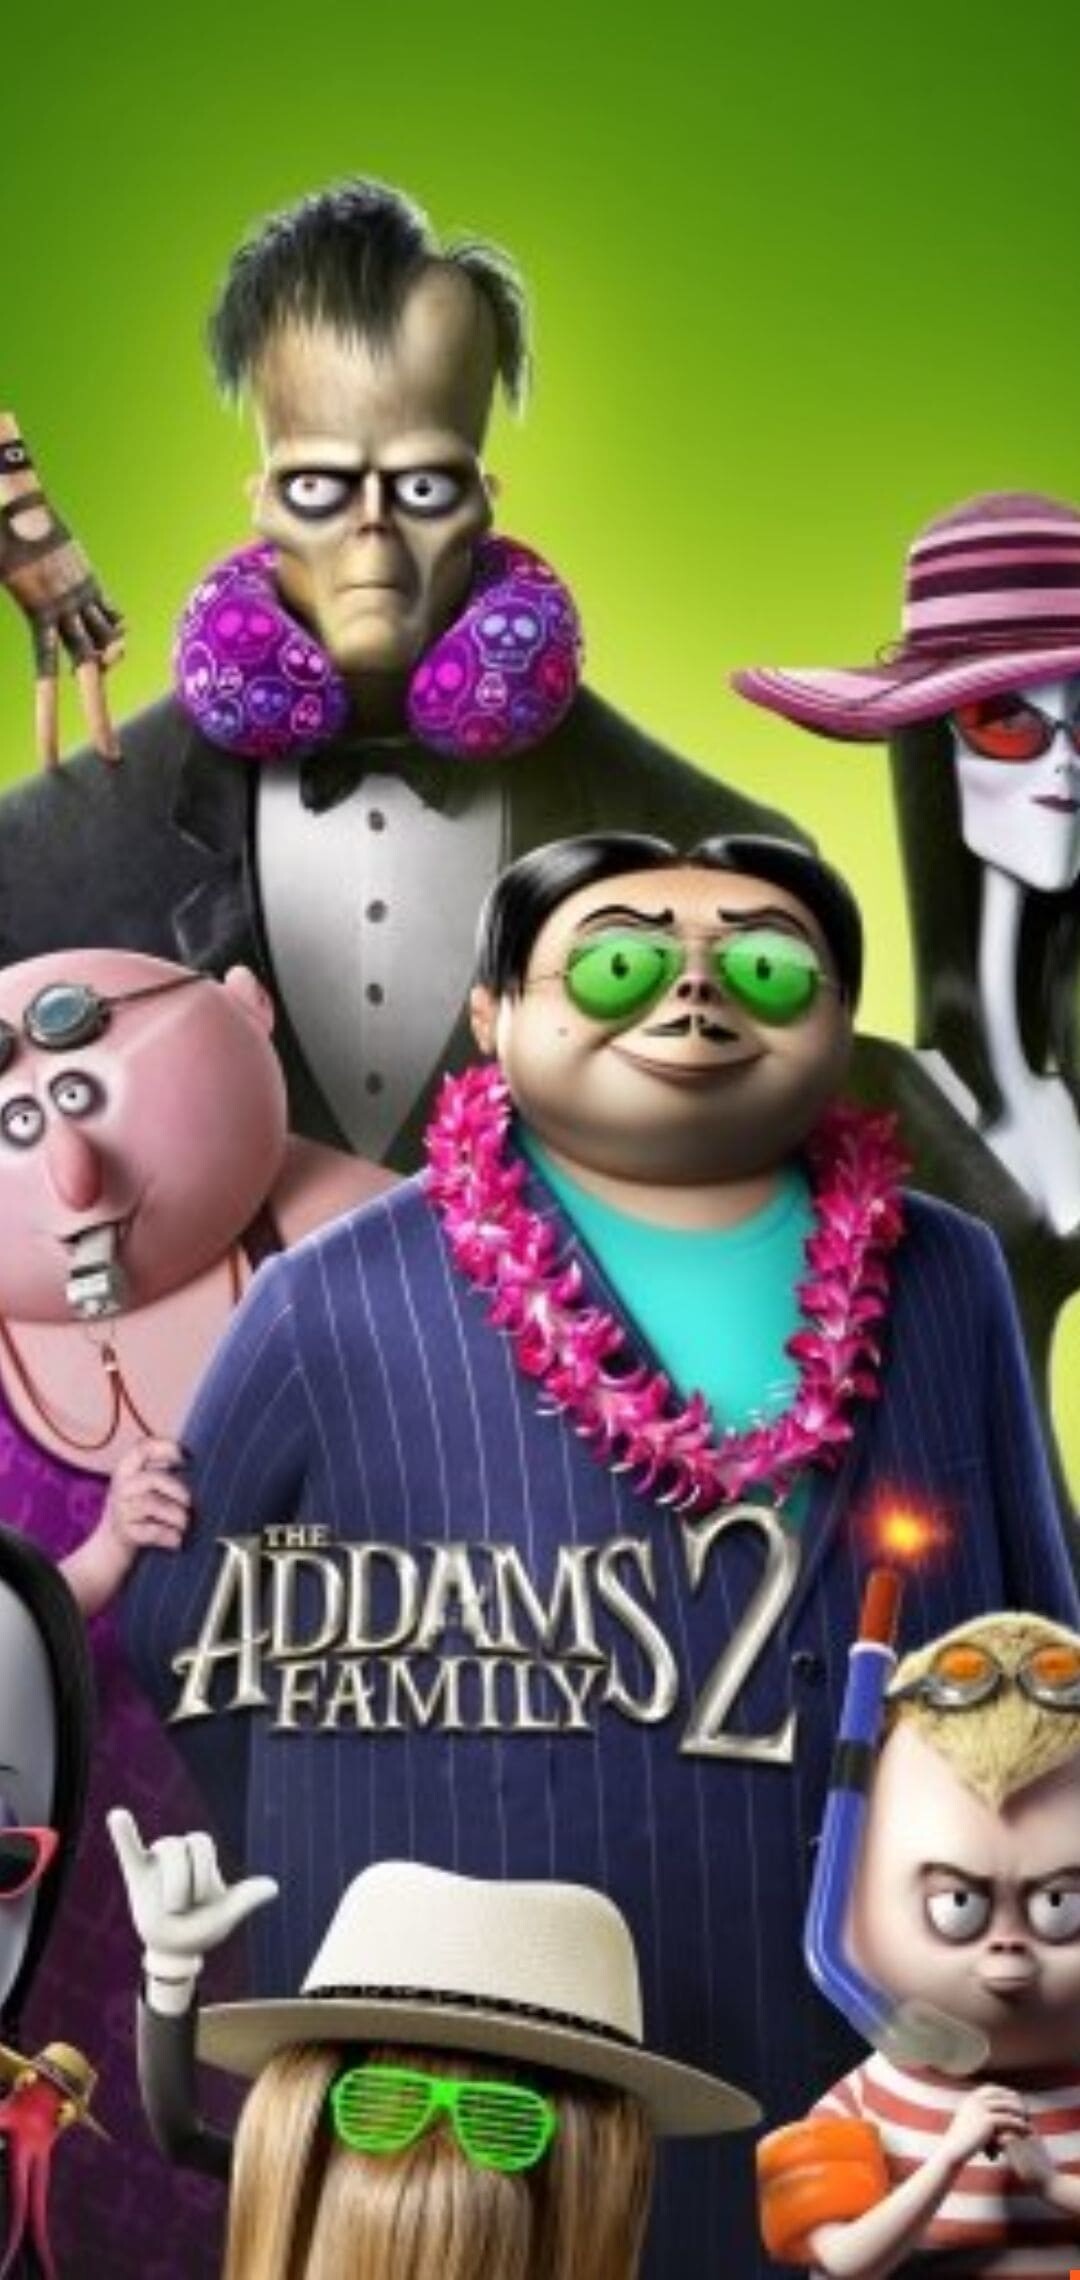 The Addams Family 2: An animated film featuring creepy family, A sequel to the 2019 film. 1080x2280 HD Background.